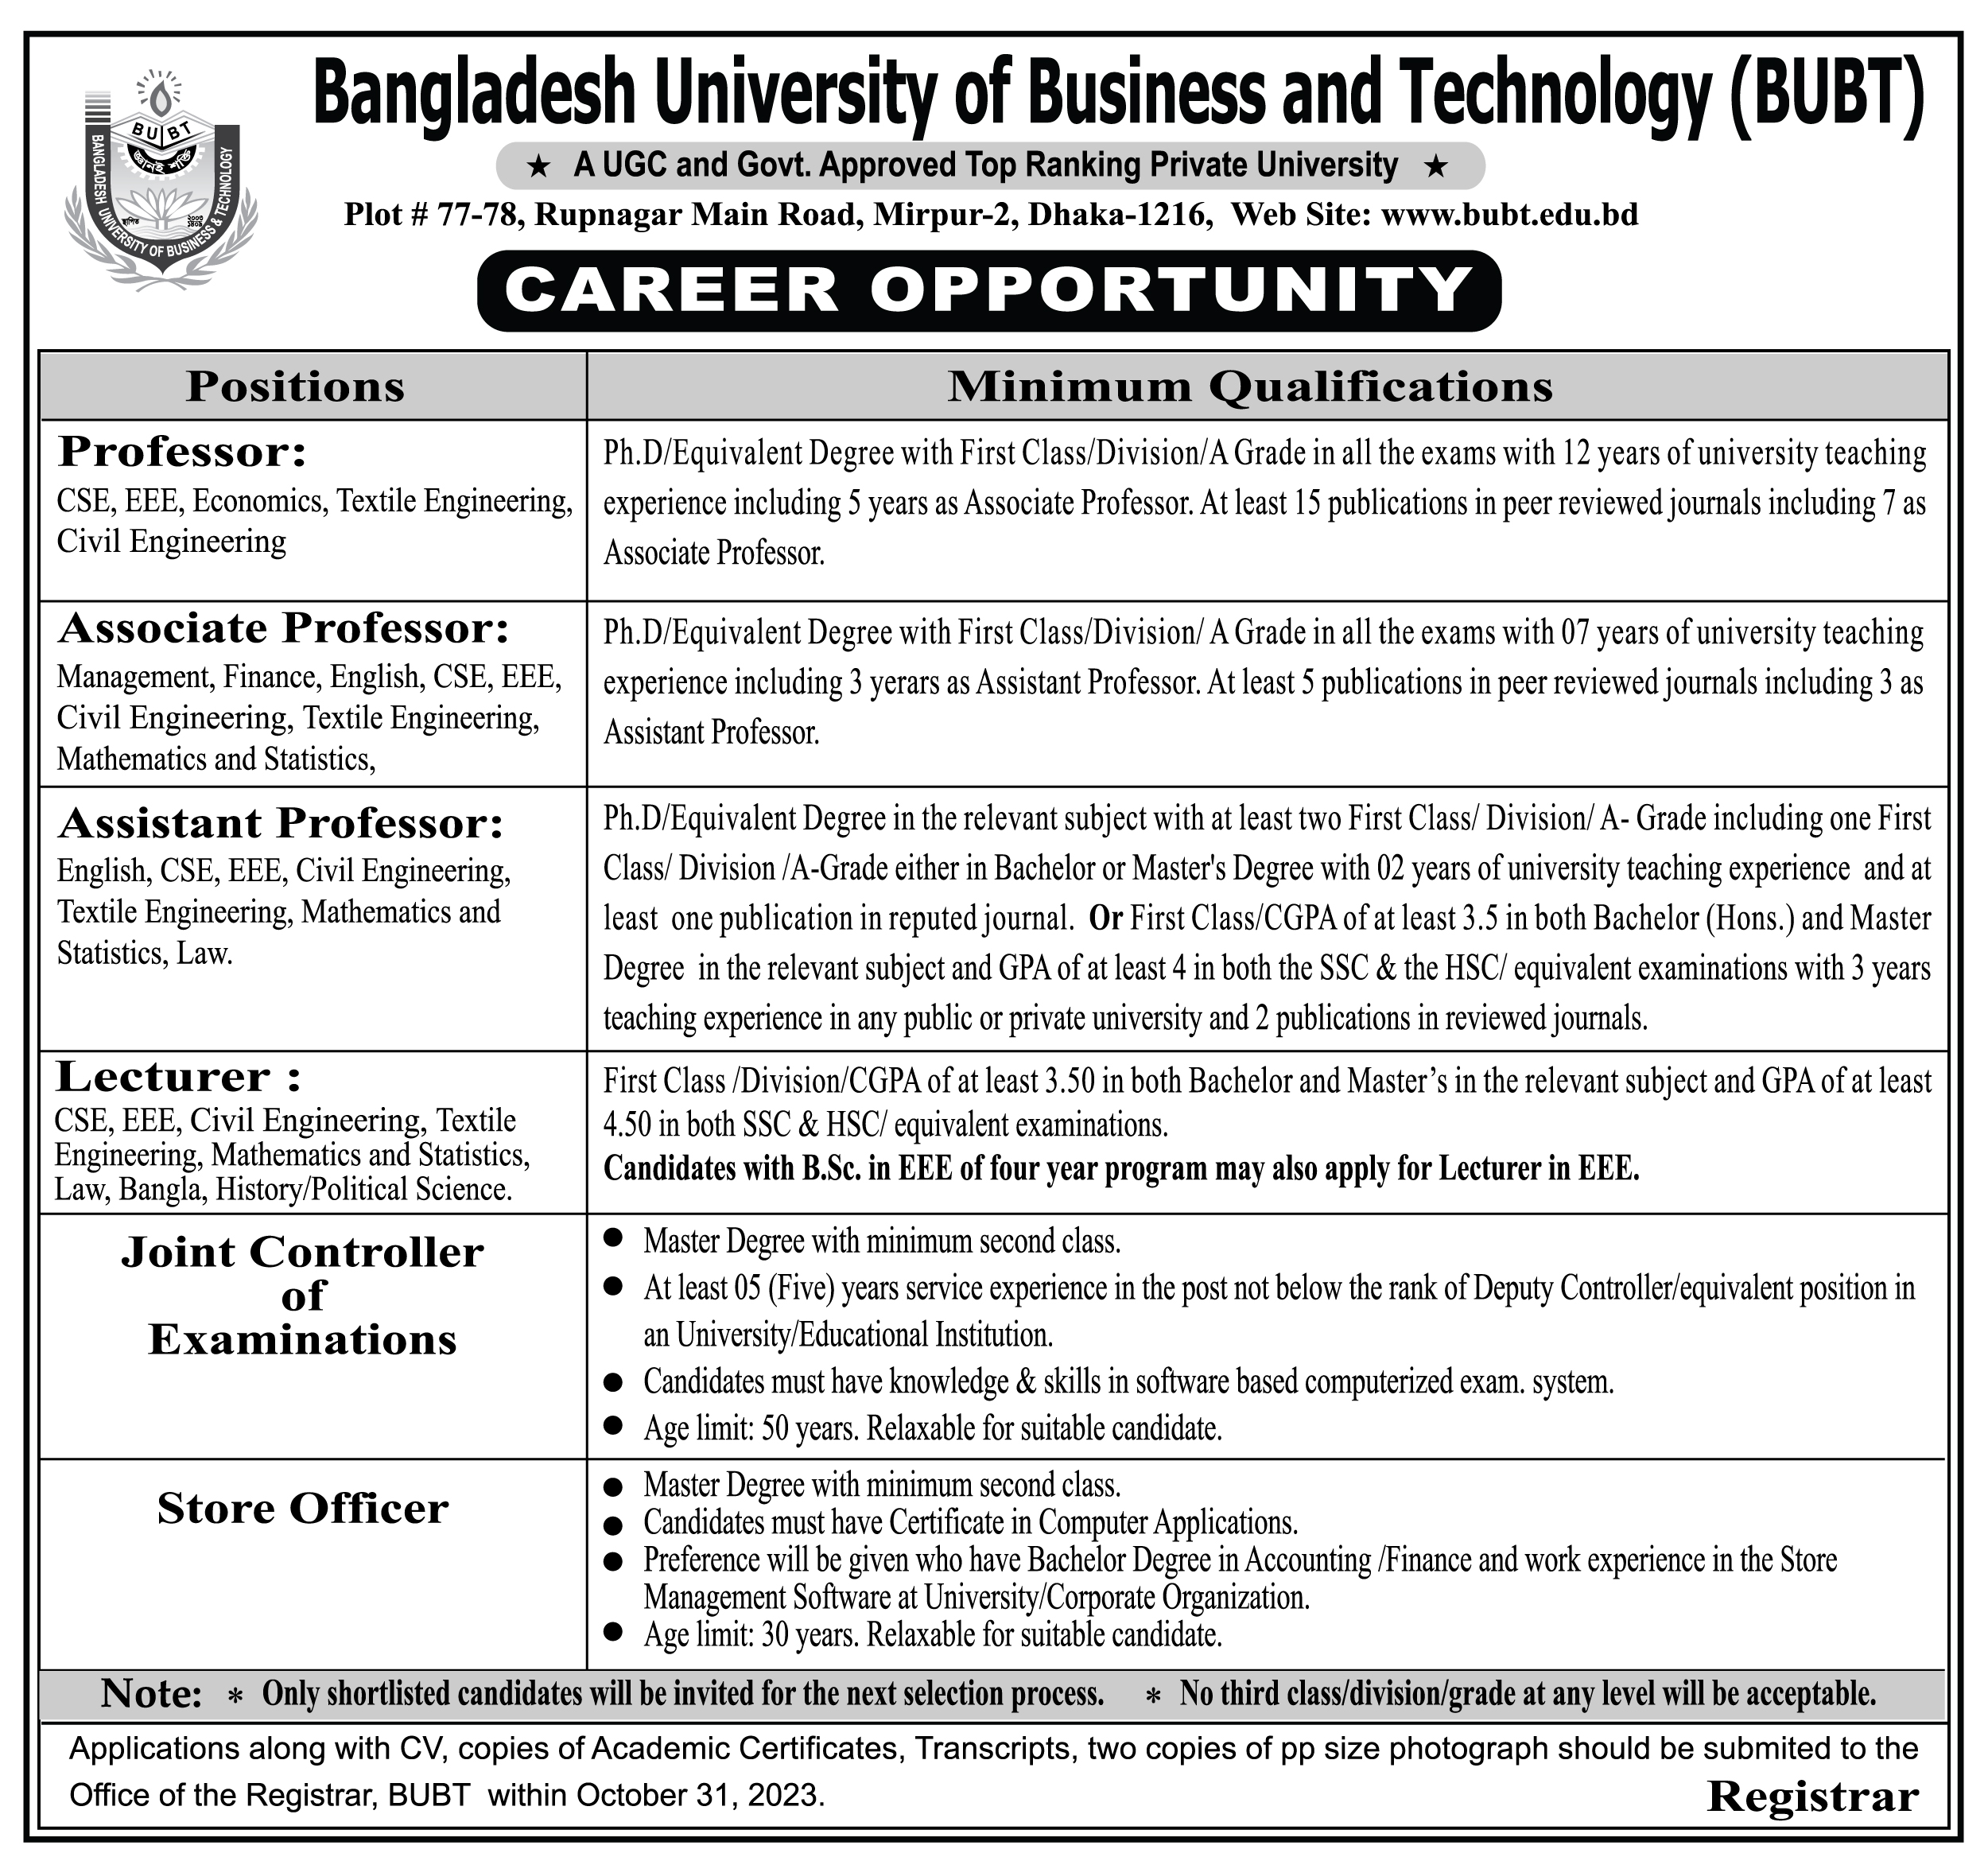 Bangladesh University of Business and Technology (BUBT) will recruit Teachers in Department of Law